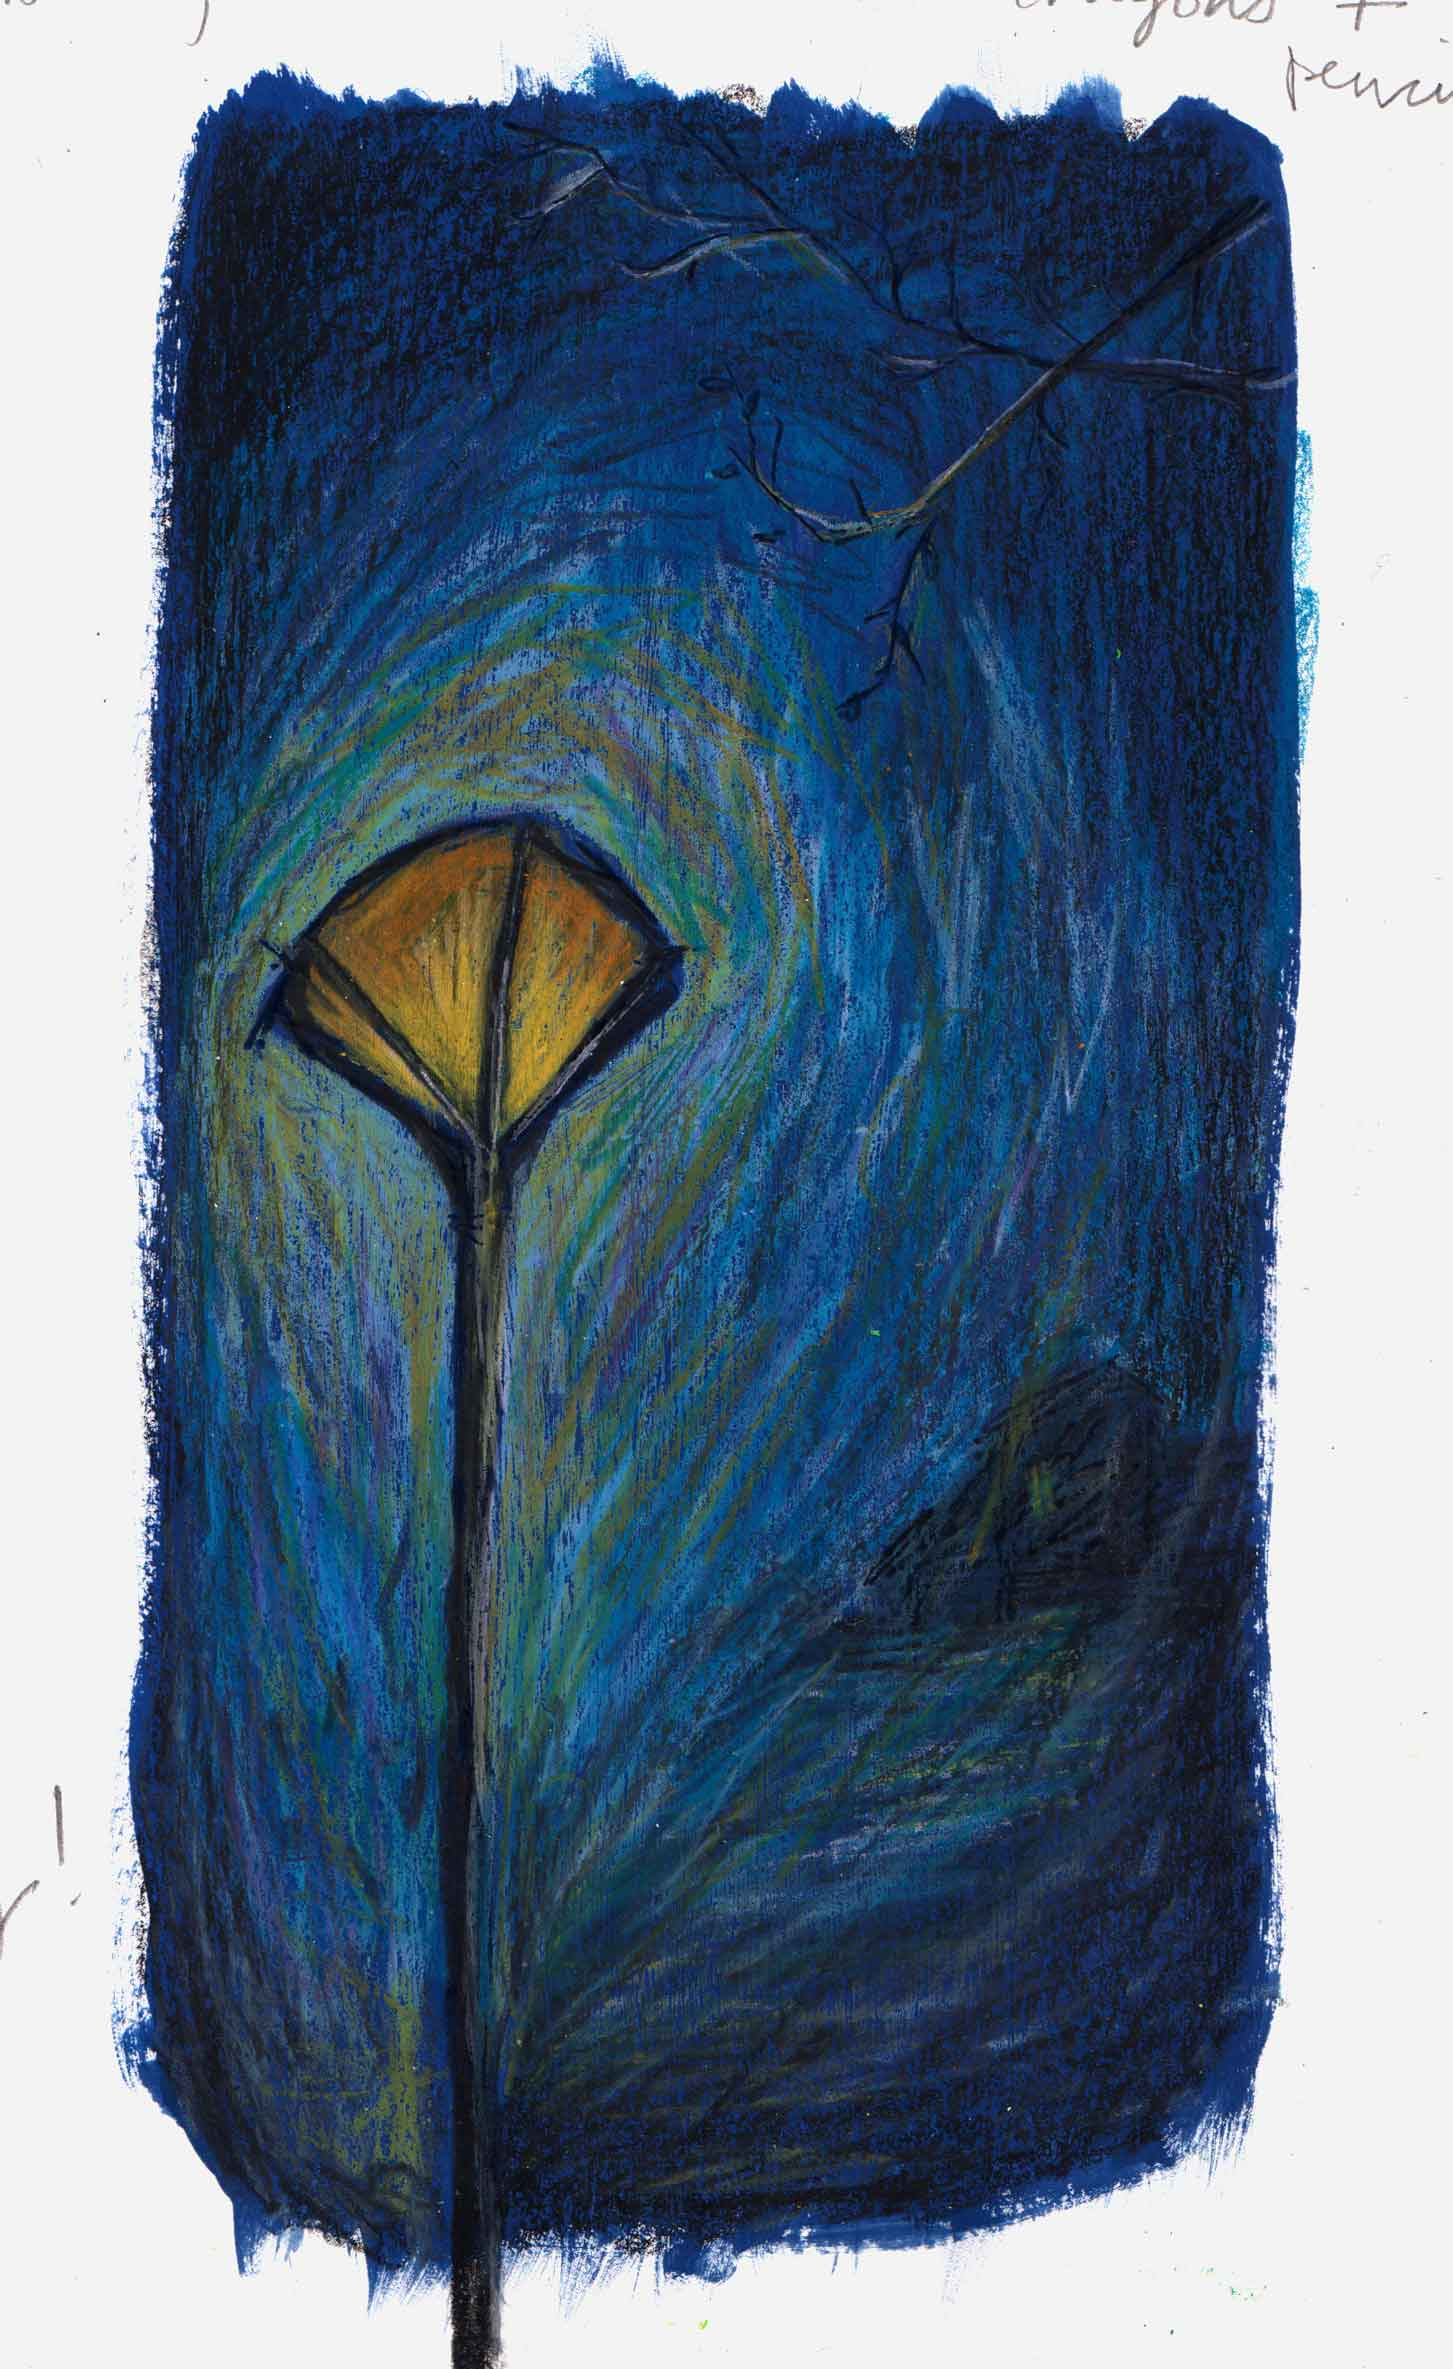 A drawing of a street lamp at night. The sky is dark blue. 